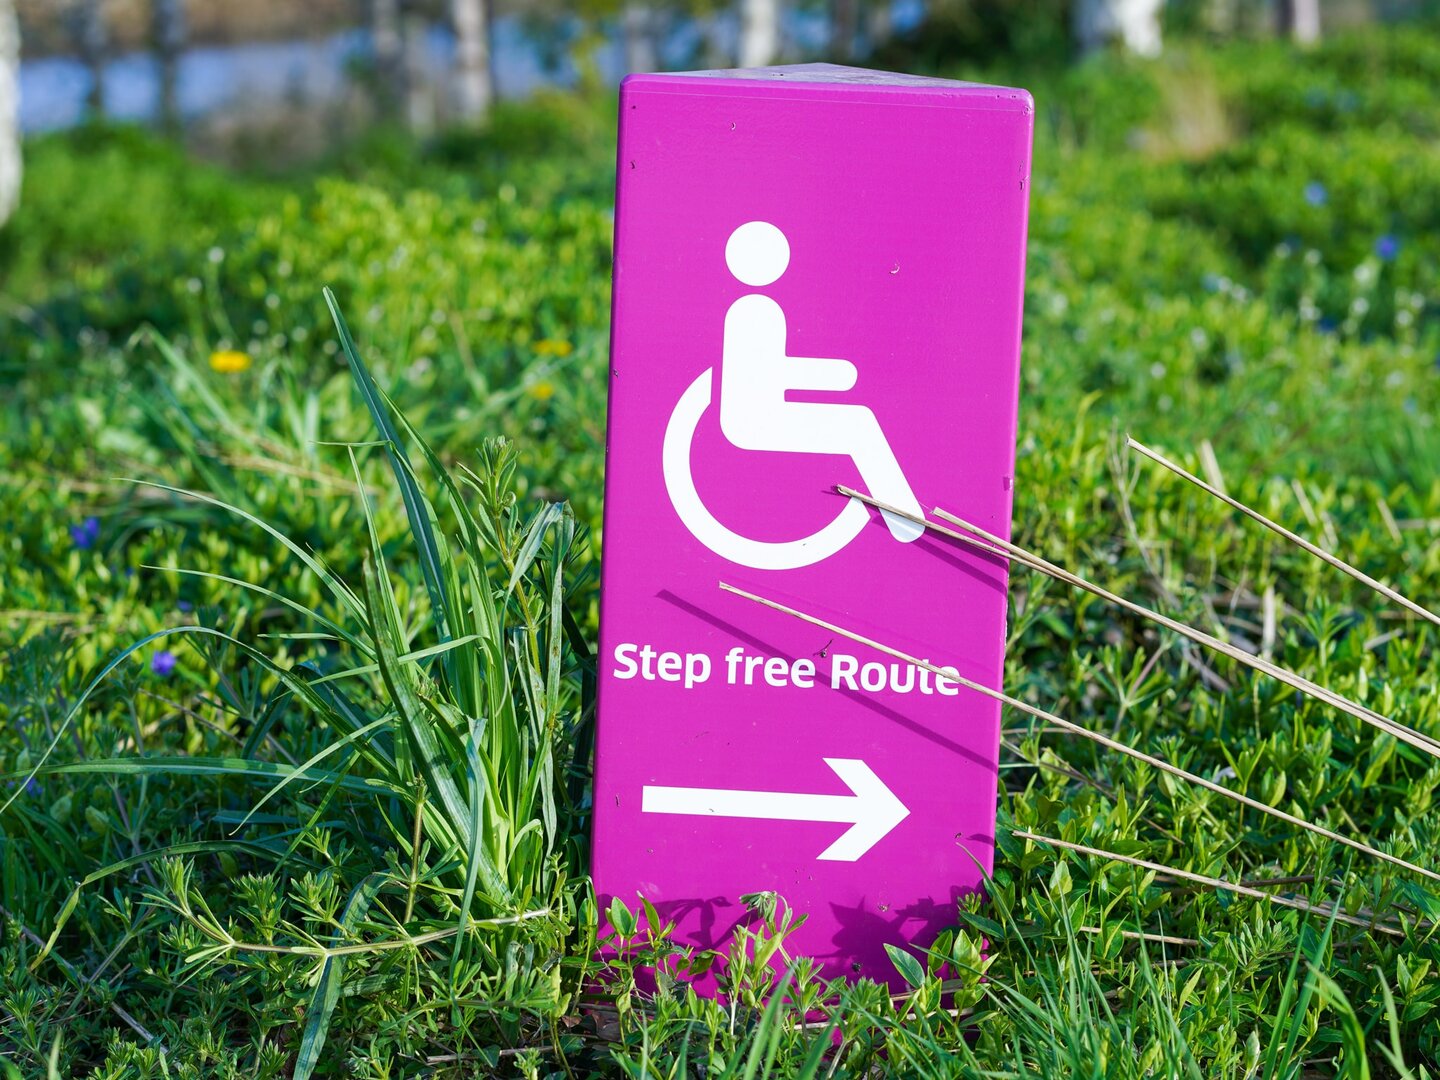 Image of pink wheelchair accessible sign in grass that says "Step free Route"